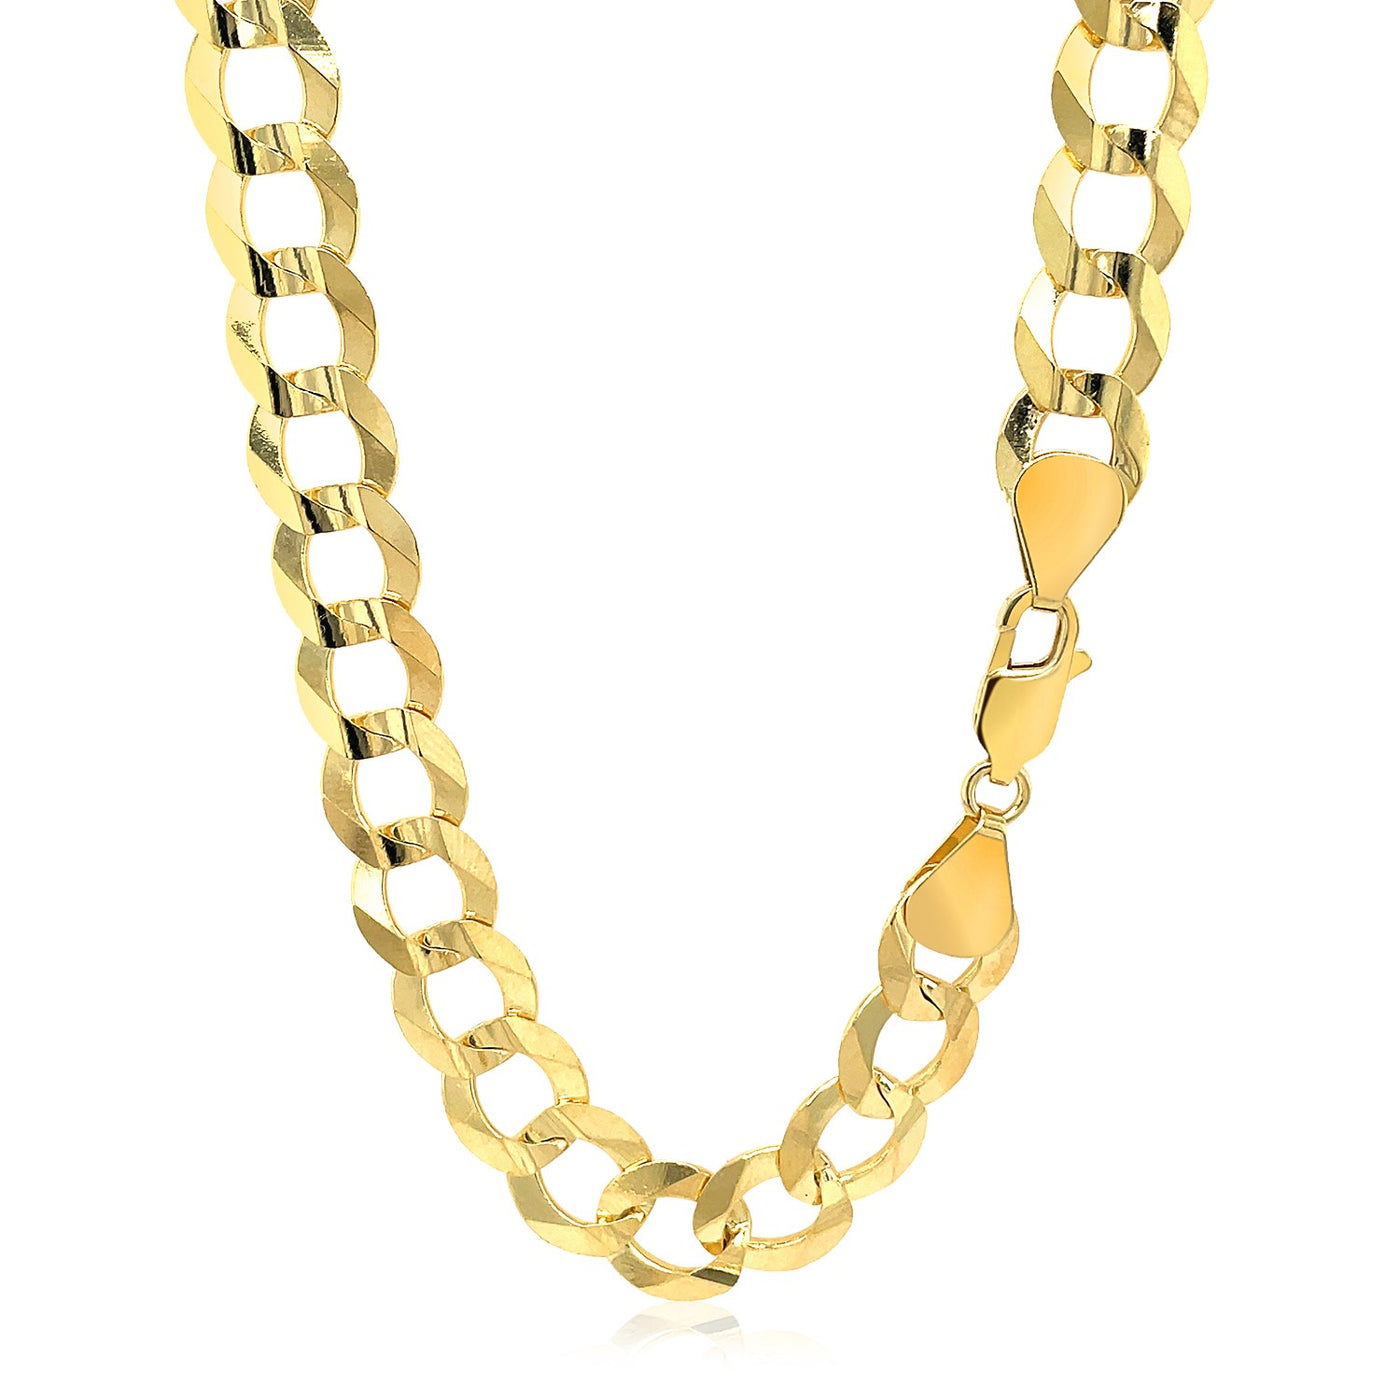 14k Yellow Gold Solid Curb Chain 10mm